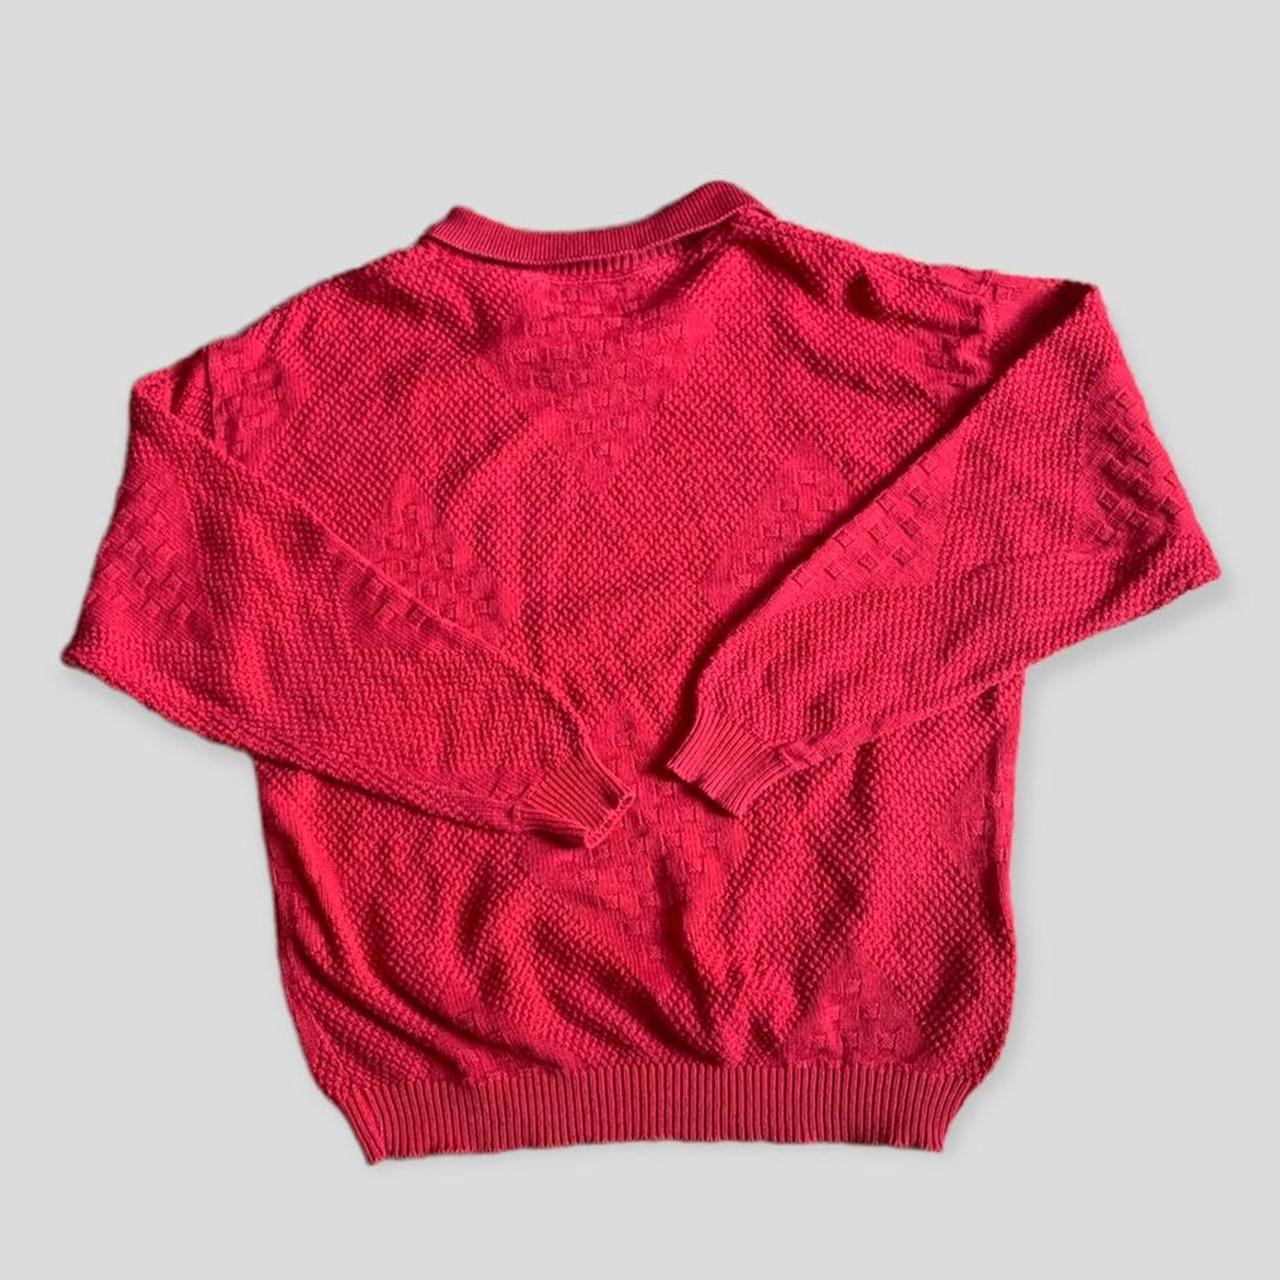 Product Image 2 - Vintage red sweater. Red knit